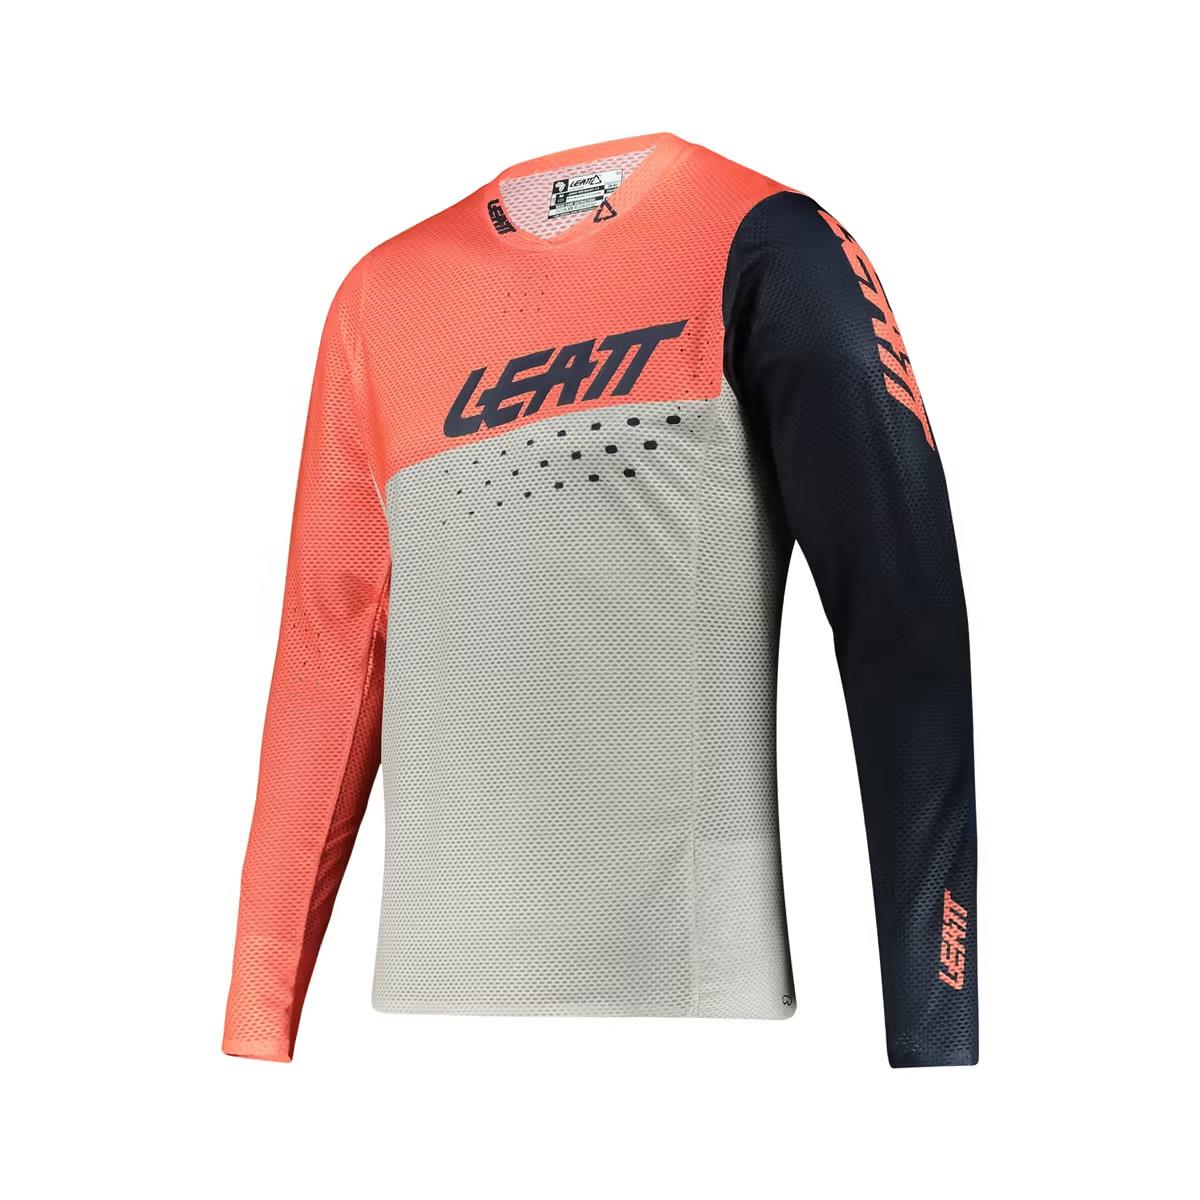 Maillot Manches Longues Mtb Gravity 4.0 Coral taille M